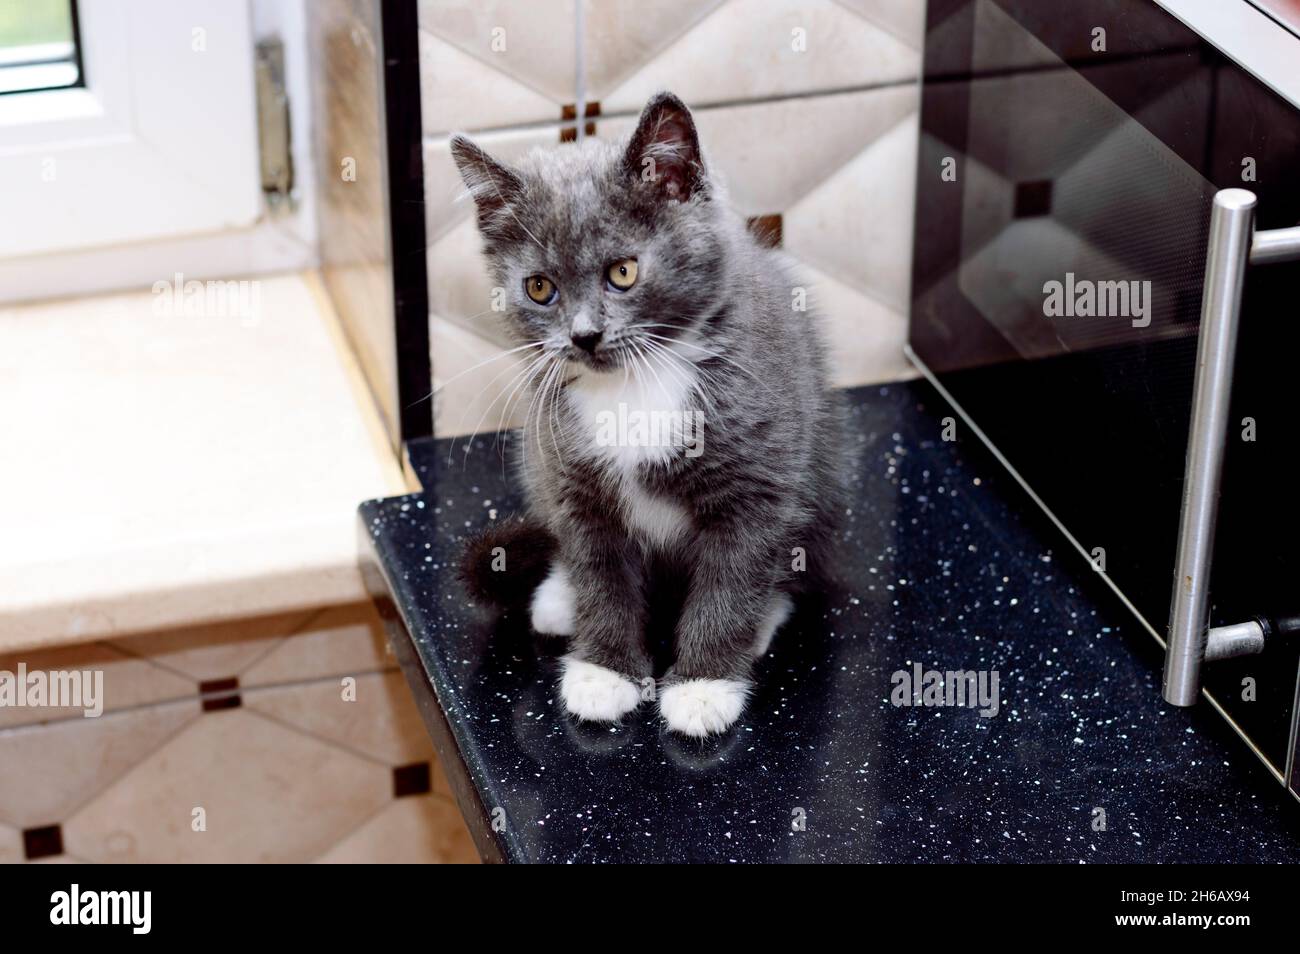 scottish bicolor blue kitten sitting in the kitchen, kitten in the kitchen, pet kitten, theme pet cats and kittens Stock Photo